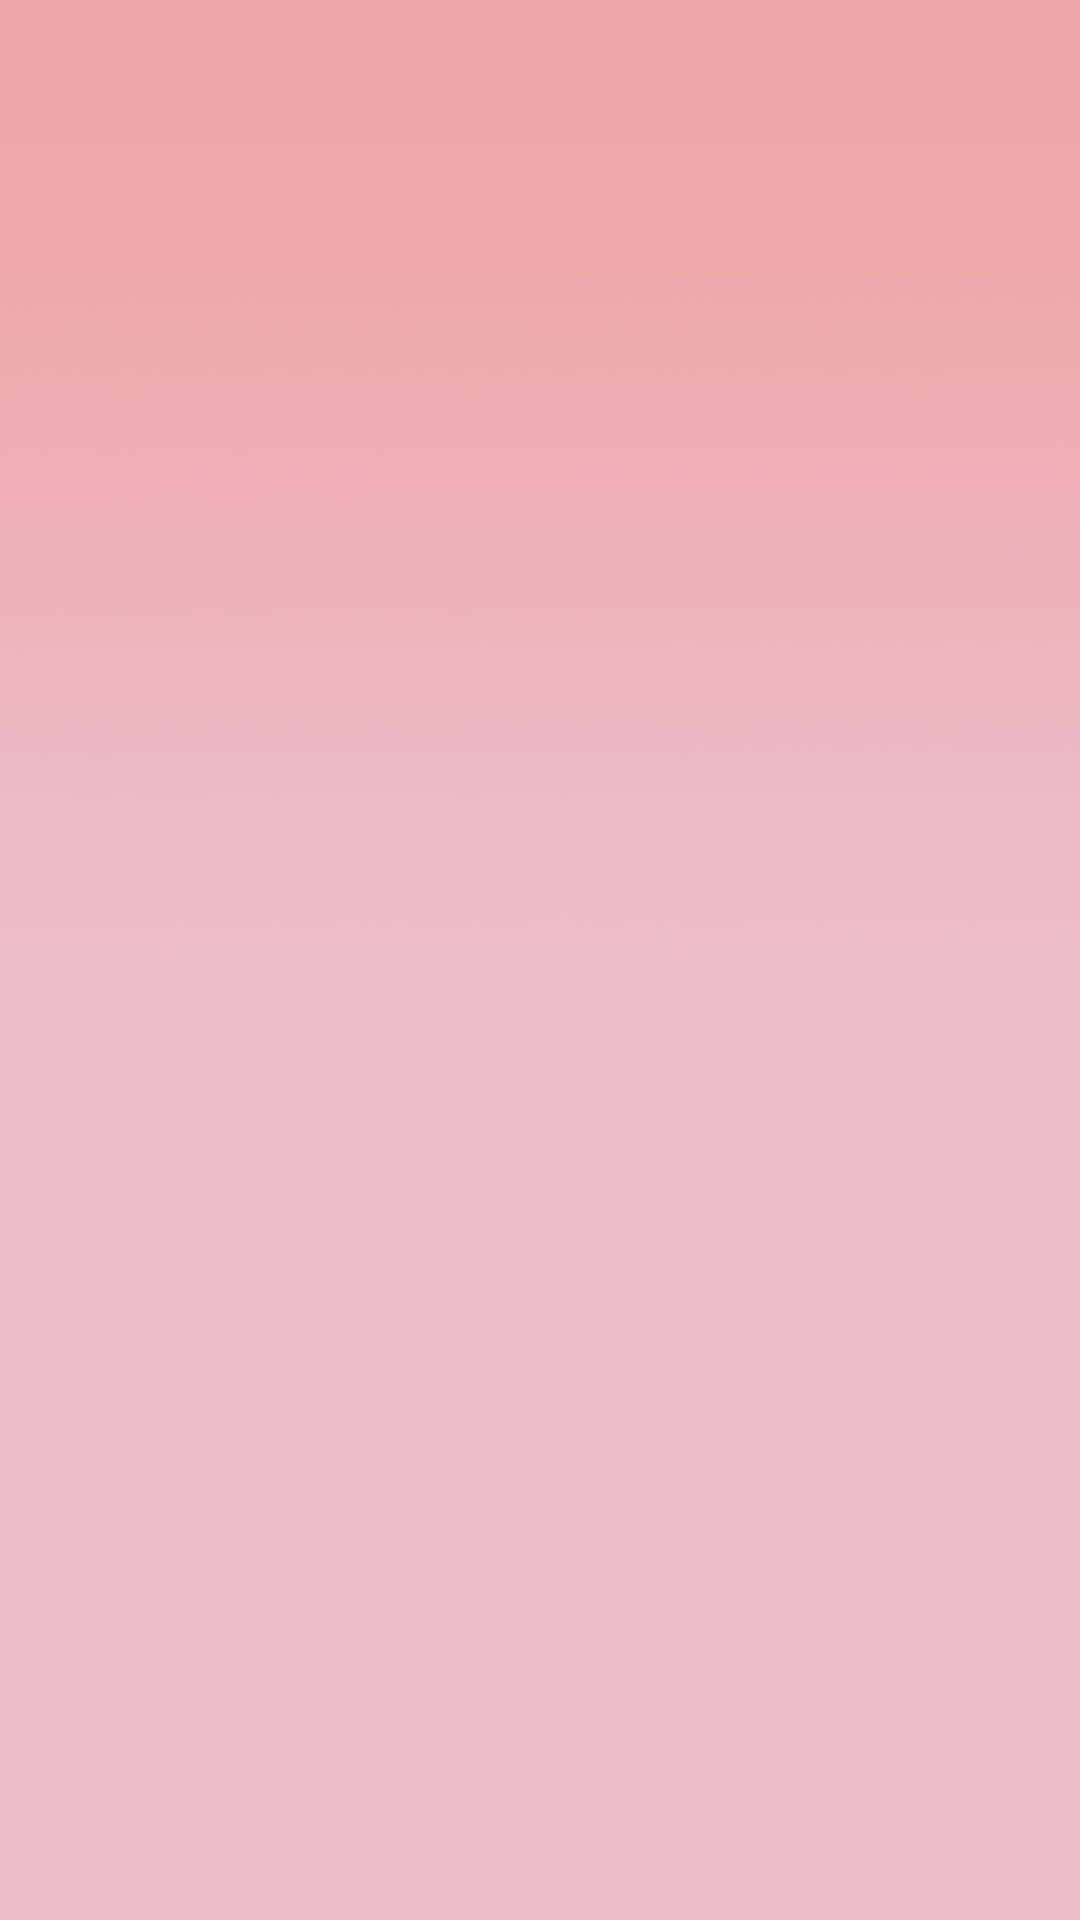 A Pink And White Gradient Background